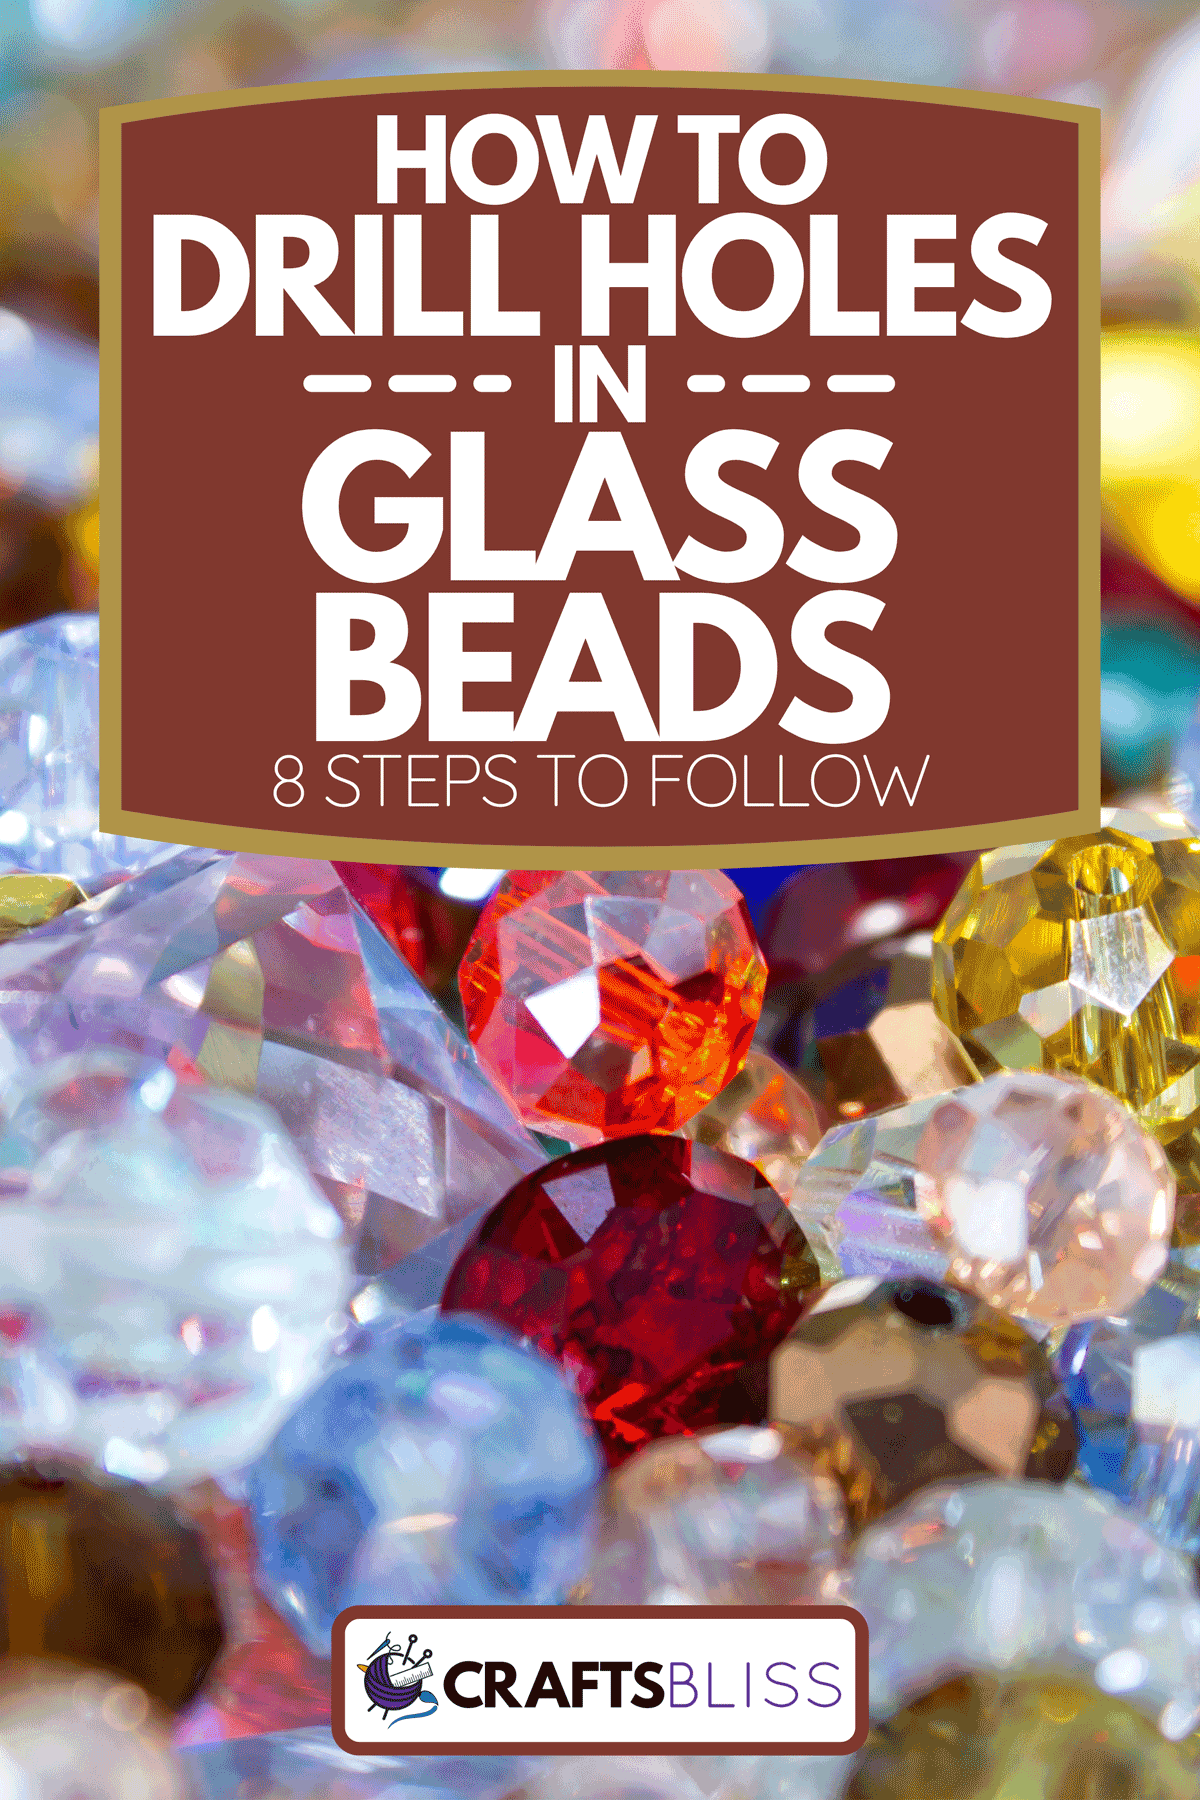 A heap of shining transparent multicolored faceted glass beads, How To Drill Holes In Glass Beads [8 Steps To Follow]